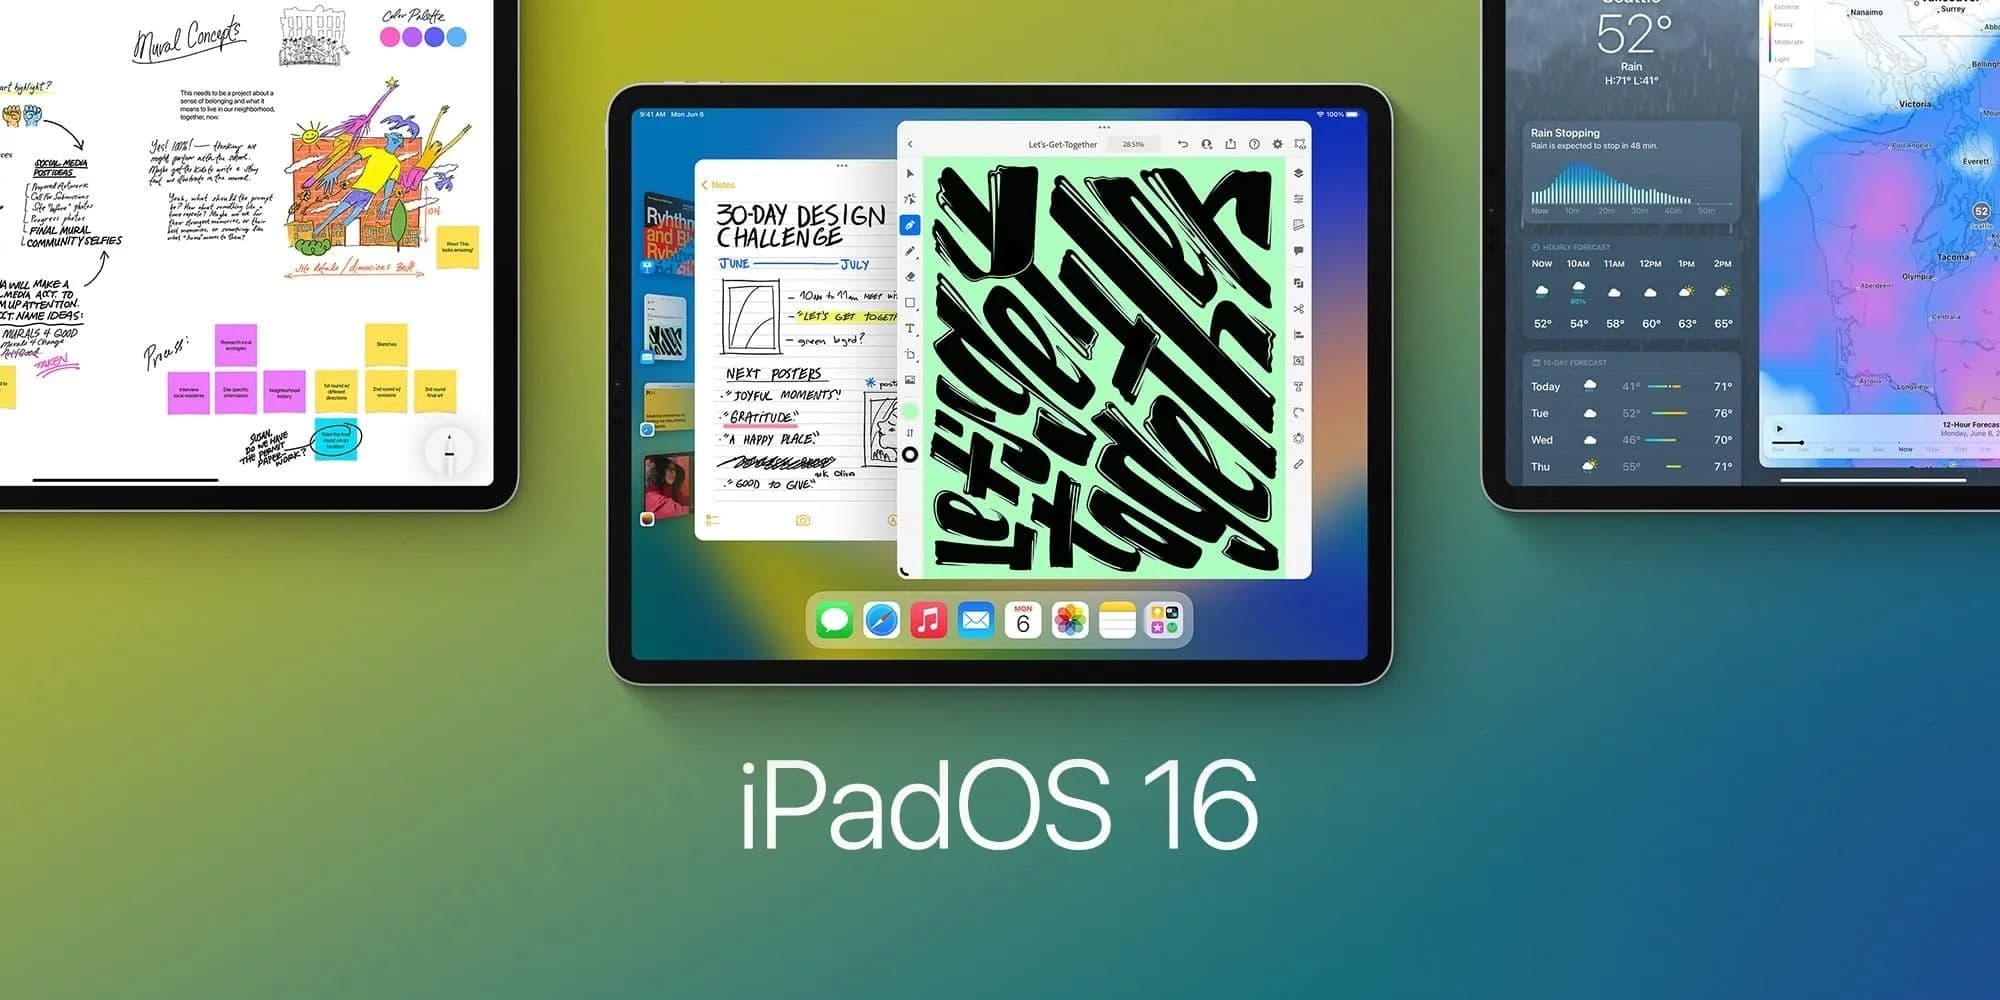 iPadOS 16: is the iPad finally a laptop replacement?